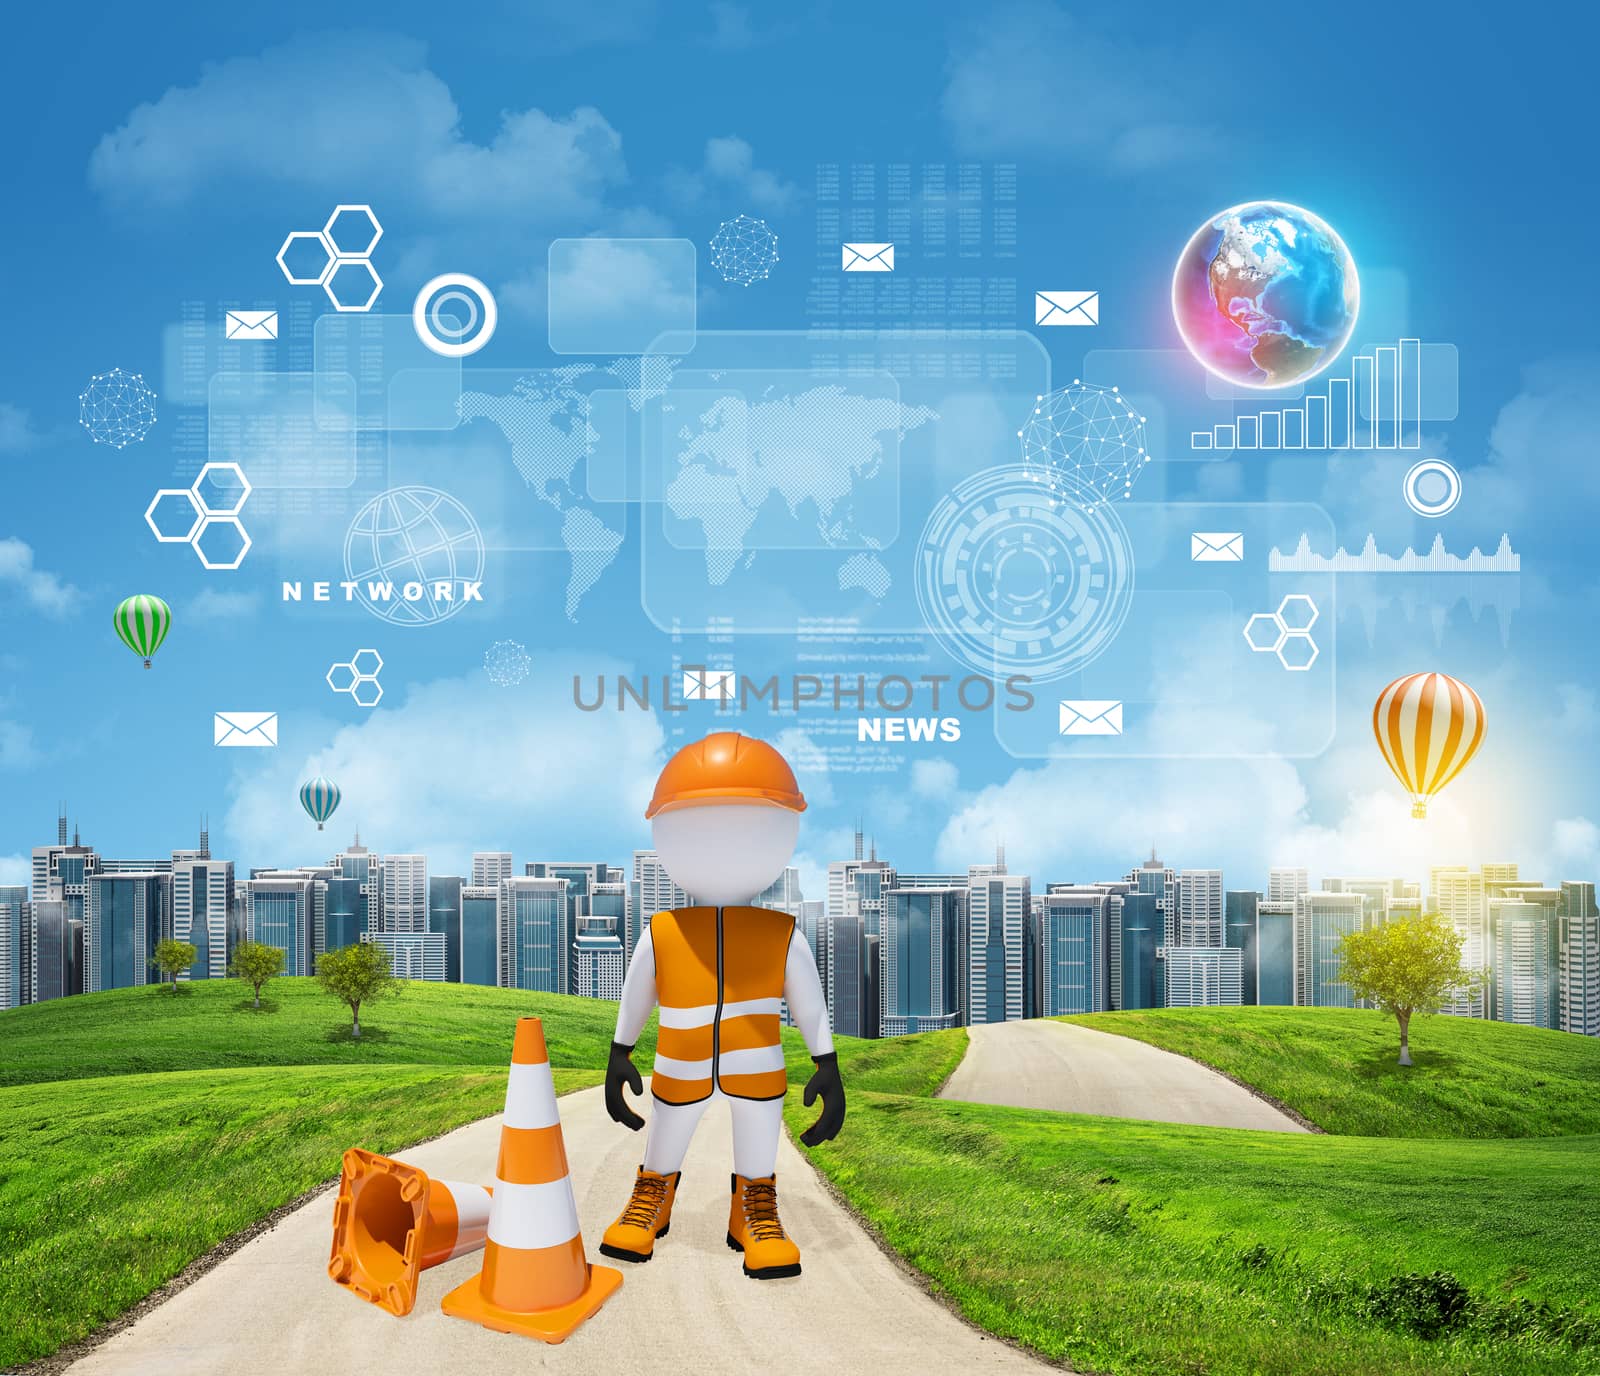 Three-dimensional worker standing on road running through green hills. City of tall buildings in background. Rectangles, diagrams and other virtual items in sky. Elements of this image furnished by NASA